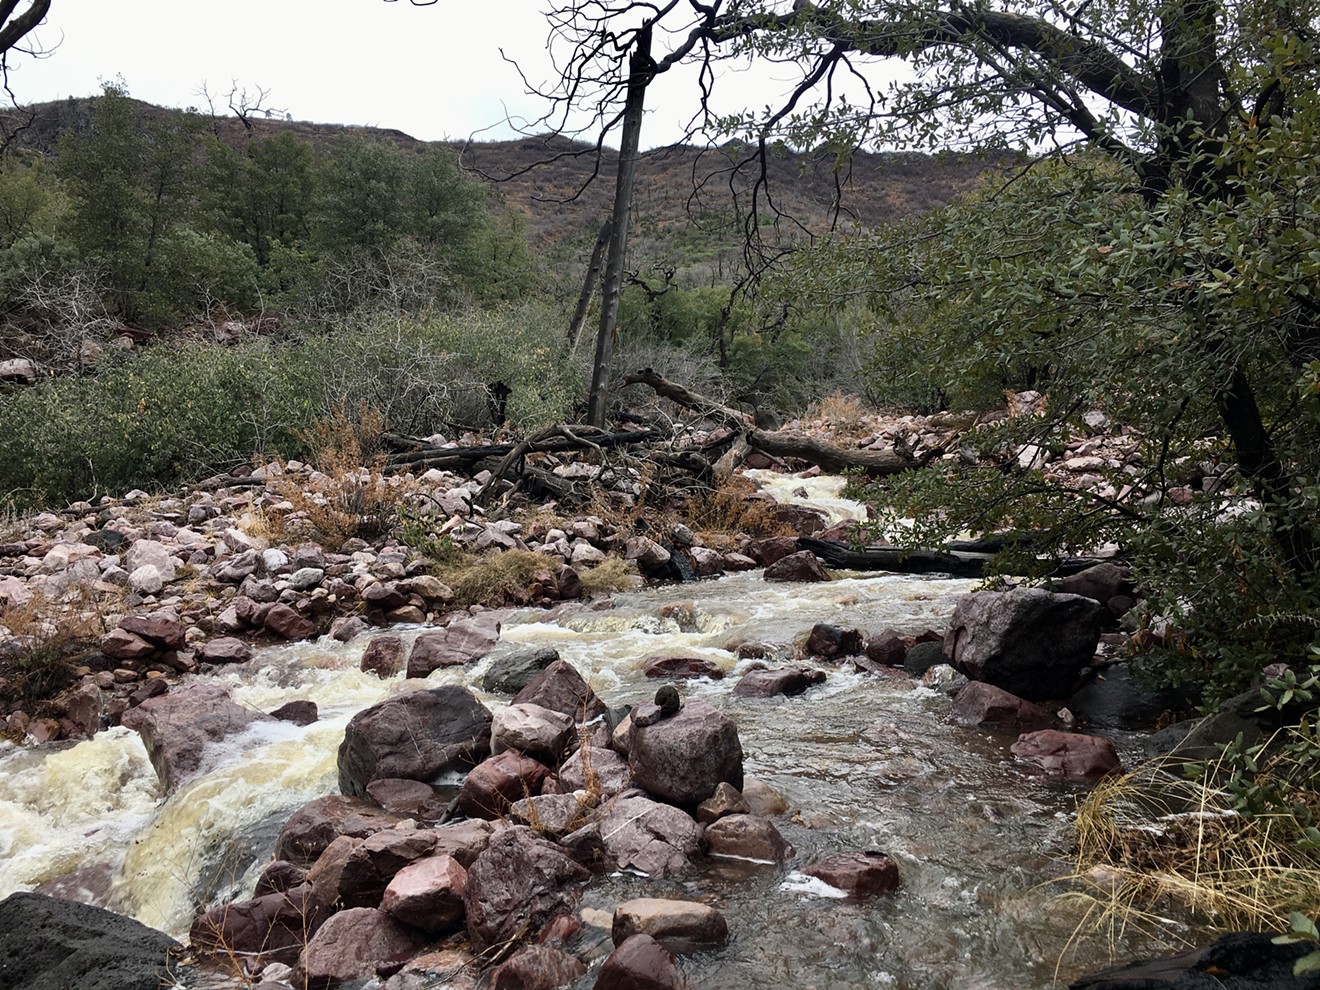 The vast majority of Arizona streams and waterways would lose Clean Water Act protections under the Trump administration's revision of Waters of the United States.